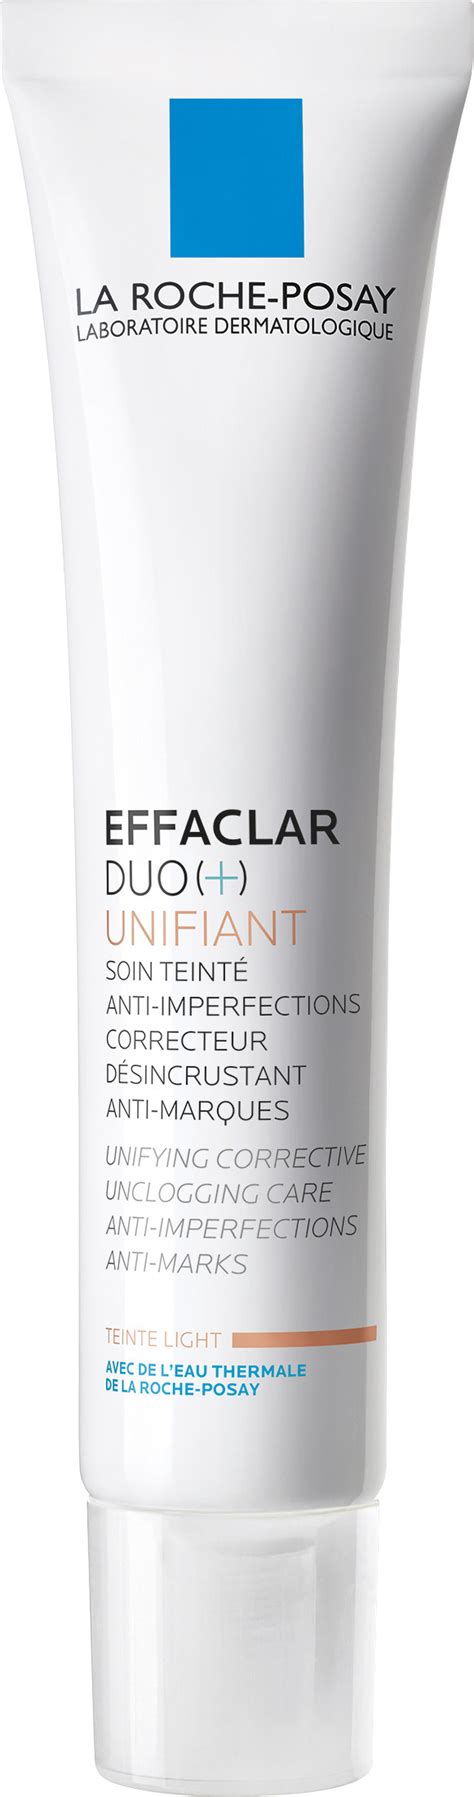 Effaclar has been through rigorous dermatological testing to ensure it is suitable for use on even the most sensitive skin. La Roche-Posay Effaclar Duo + Unifiant